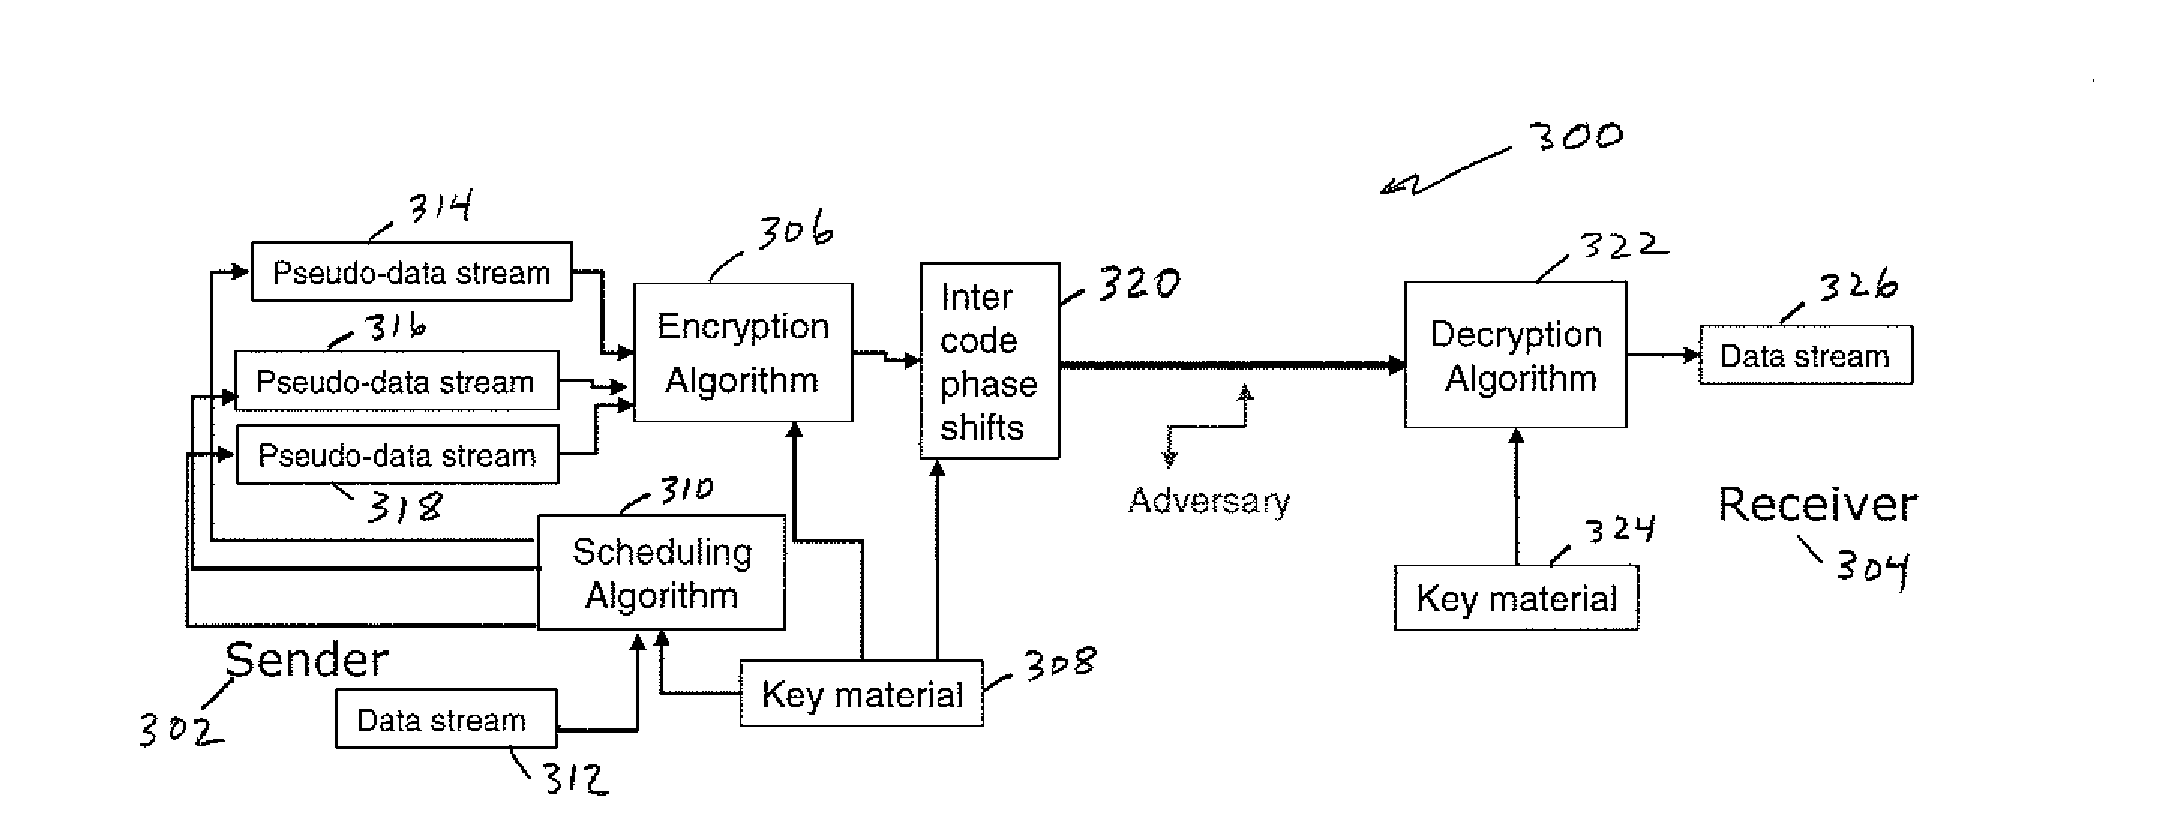 Ocdm-based photonic encryption system with provable security